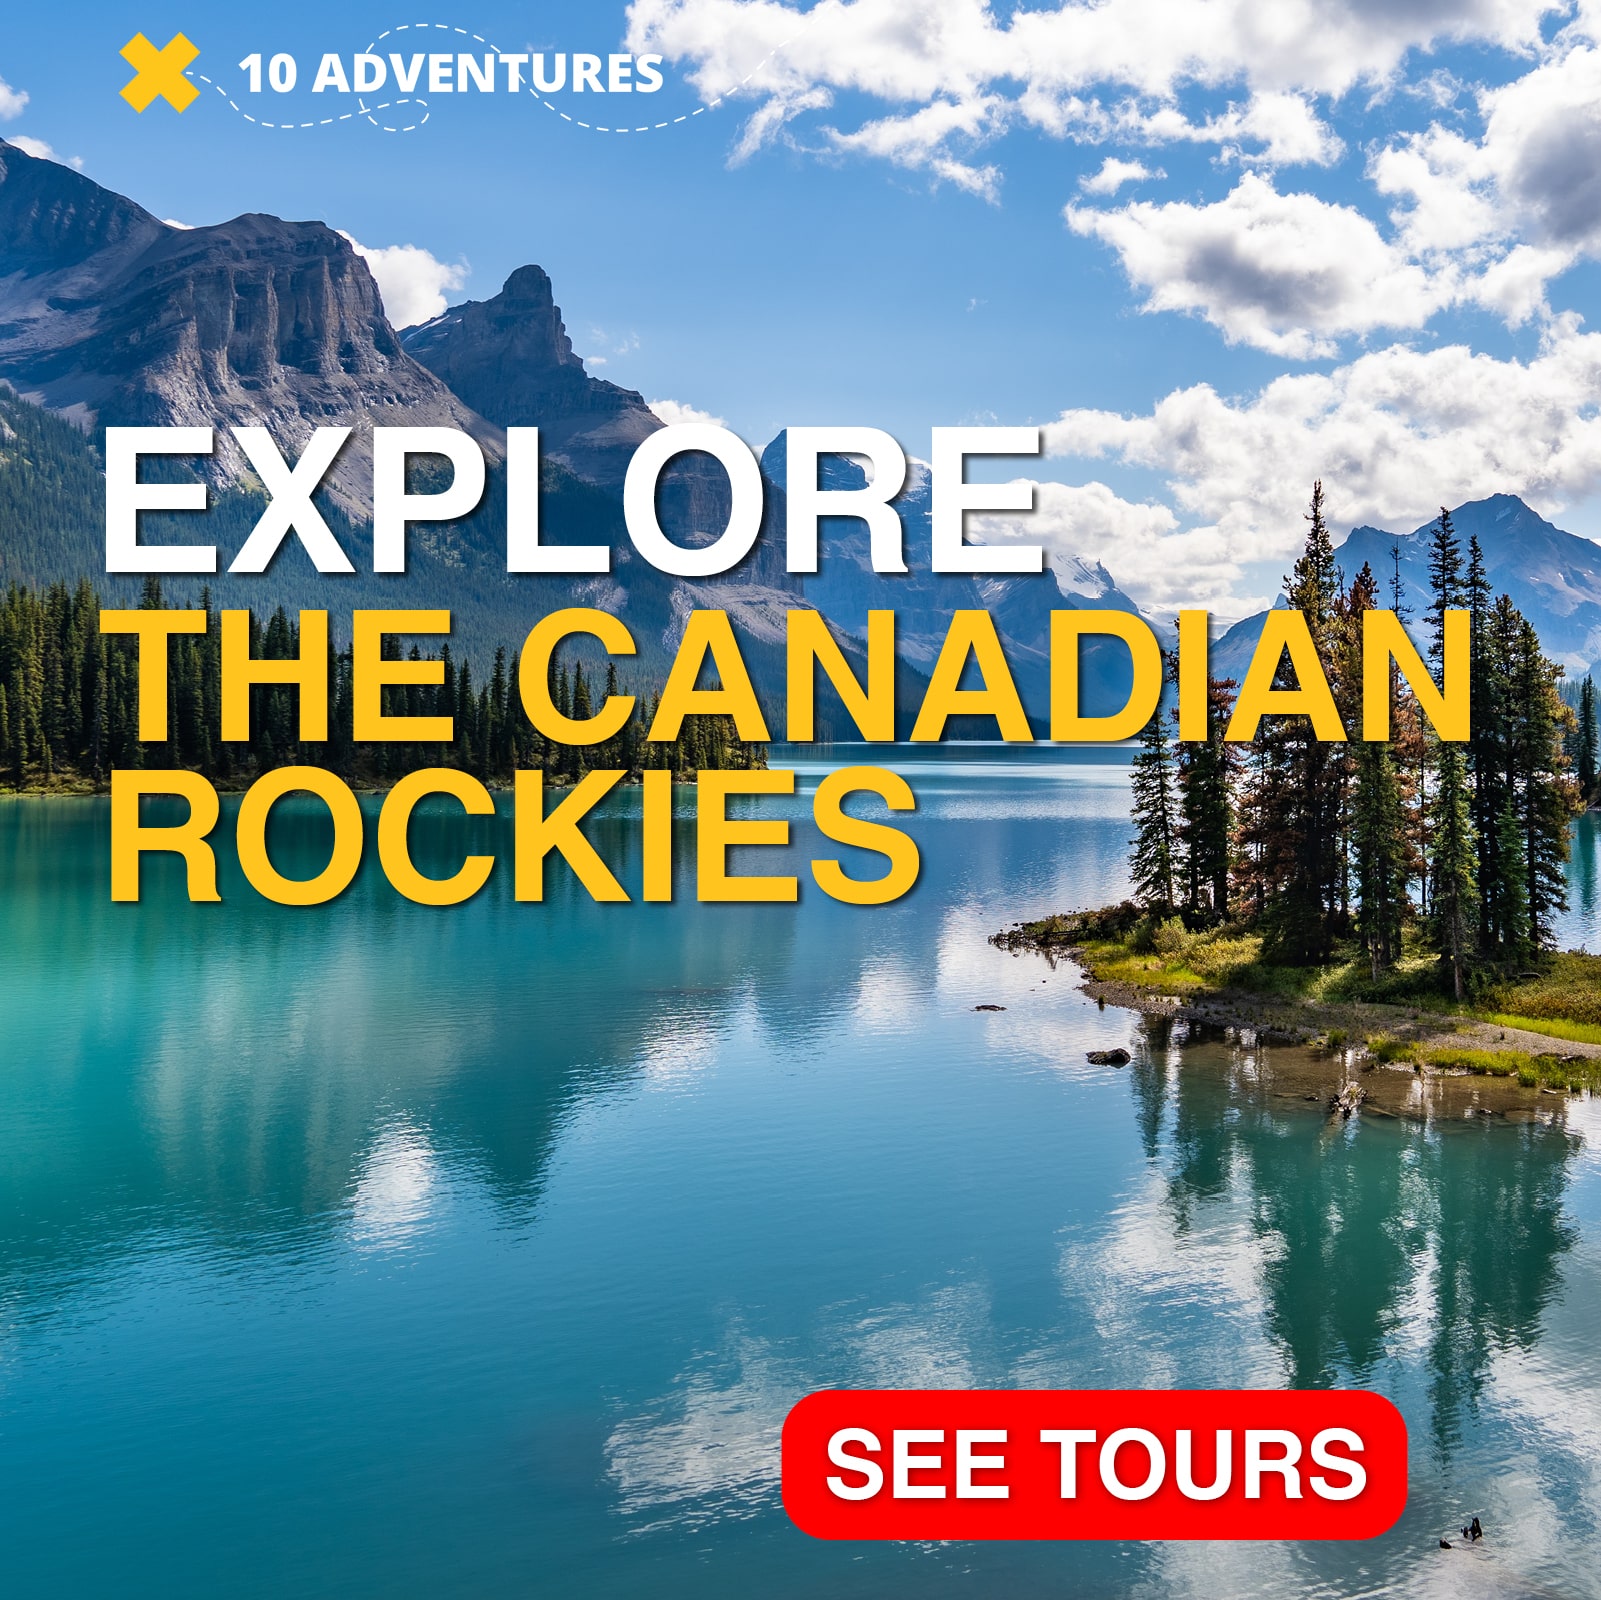 Book an adventure tour in the Canadian Rockies